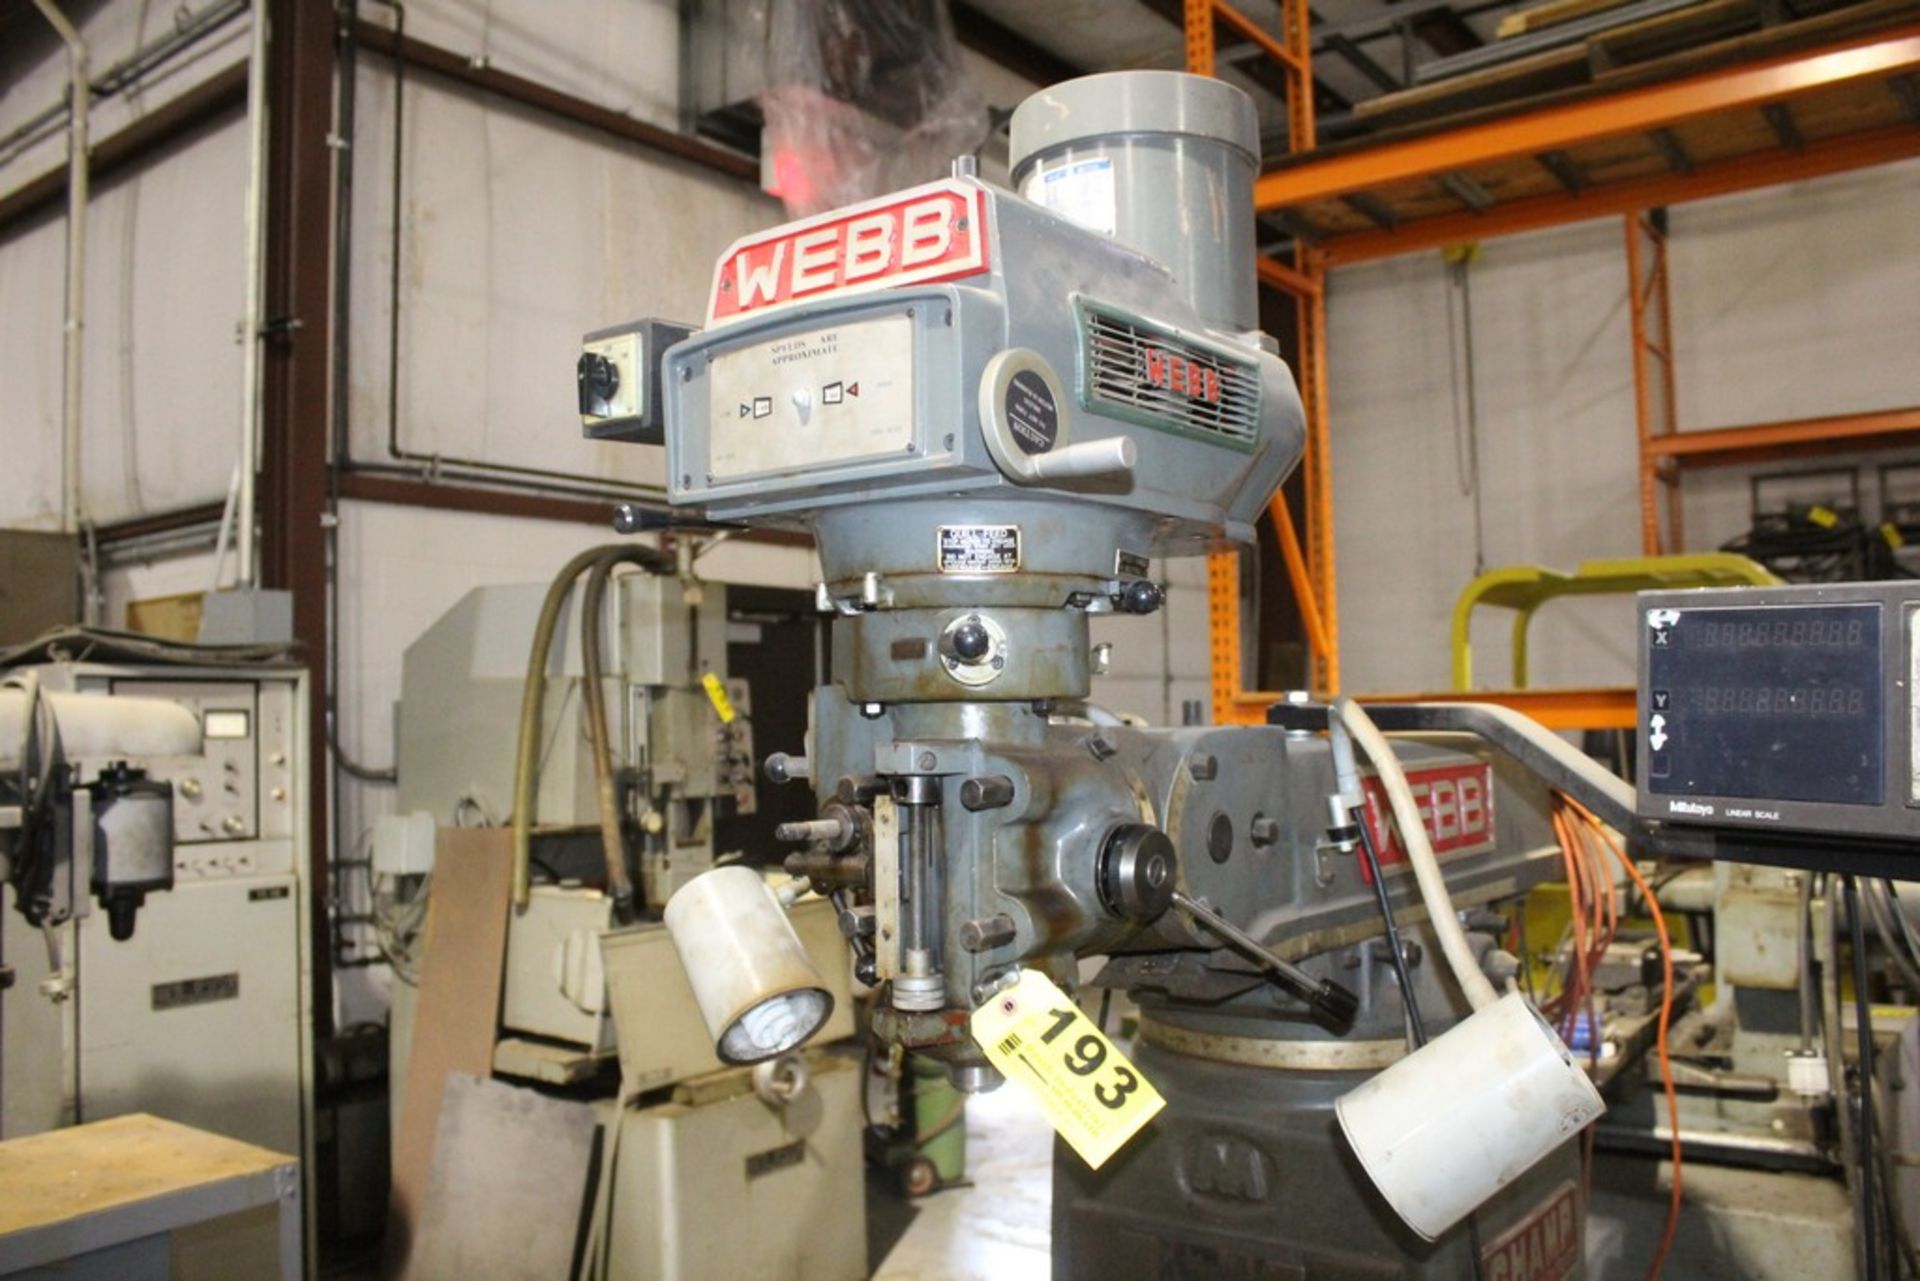 WEBB 3HP MODEL CHAMP VARIABLE SPEED RAM TYPE VERTICAL MILLING MACHINE S/N 6553 WITH 48" TABLE, - Image 2 of 6